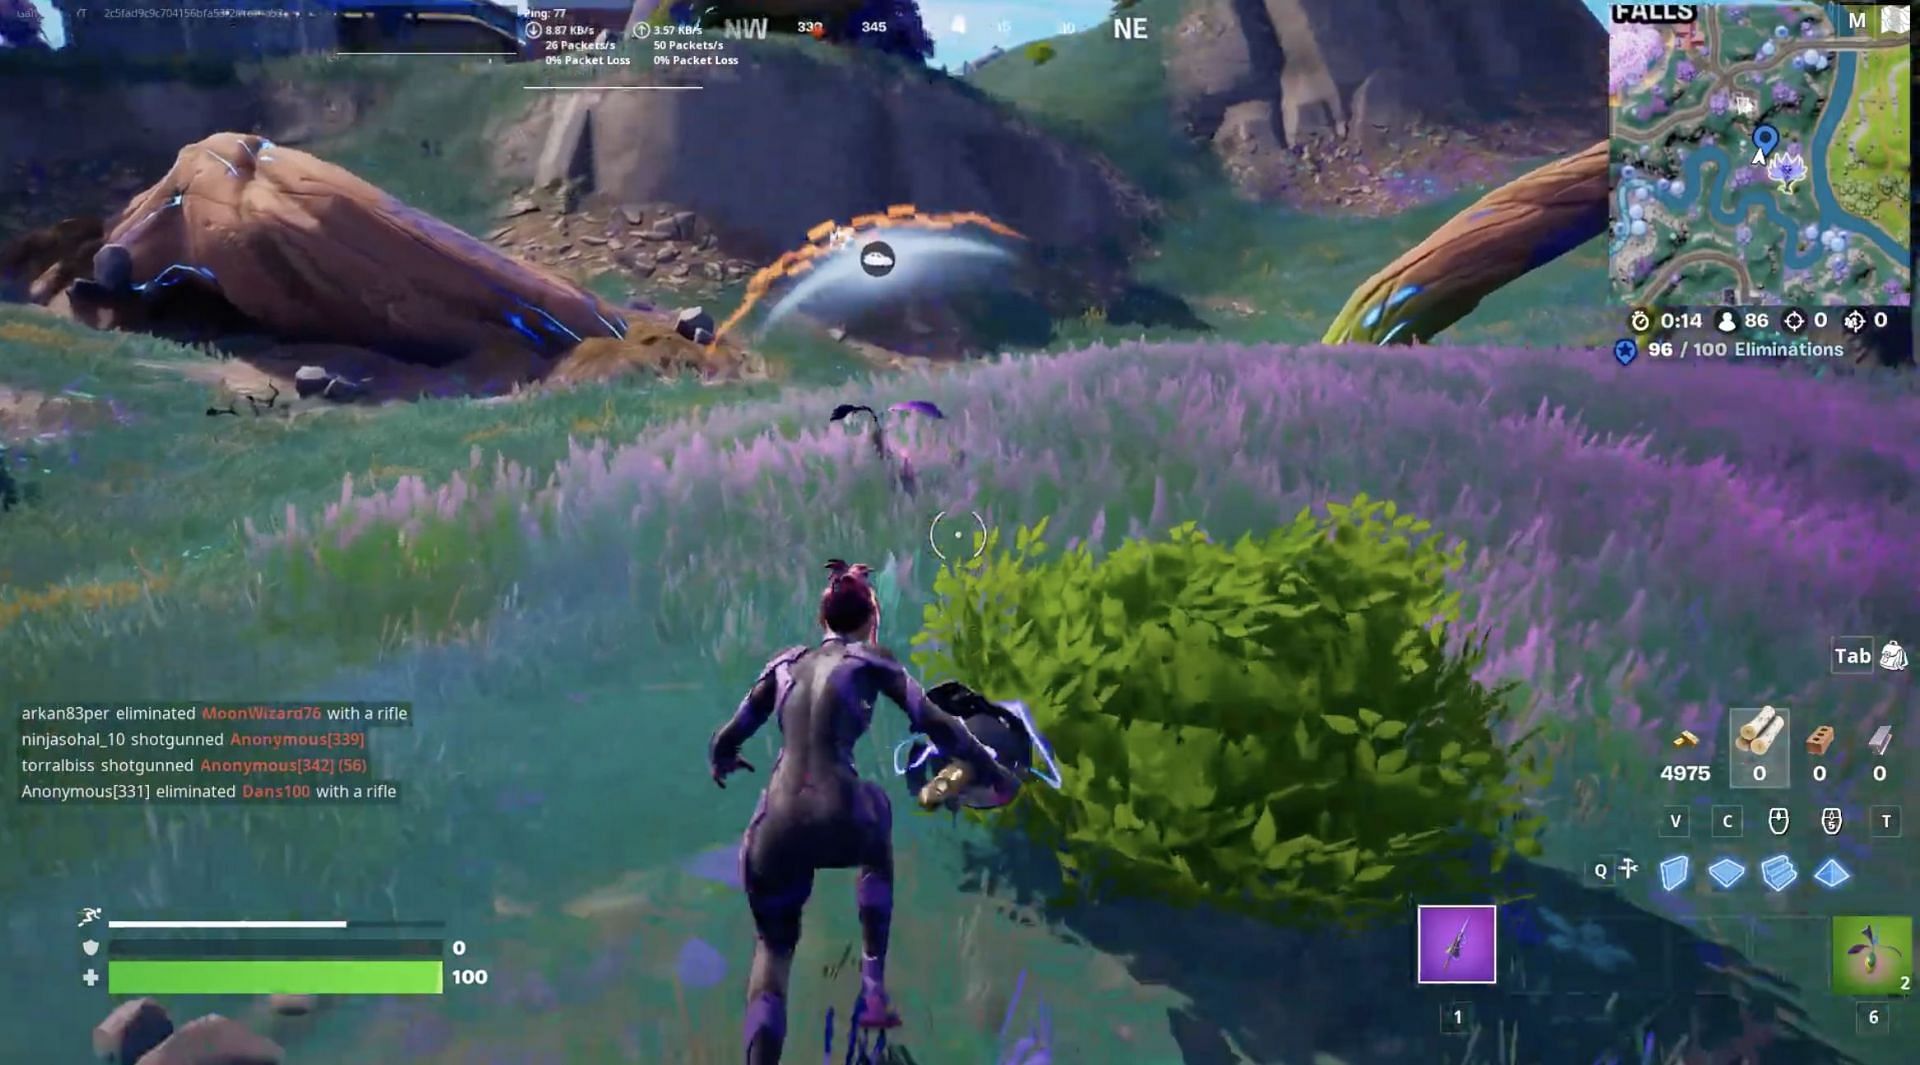 Reality Seed from a pod (Image via Fortnite Events on YouTube)